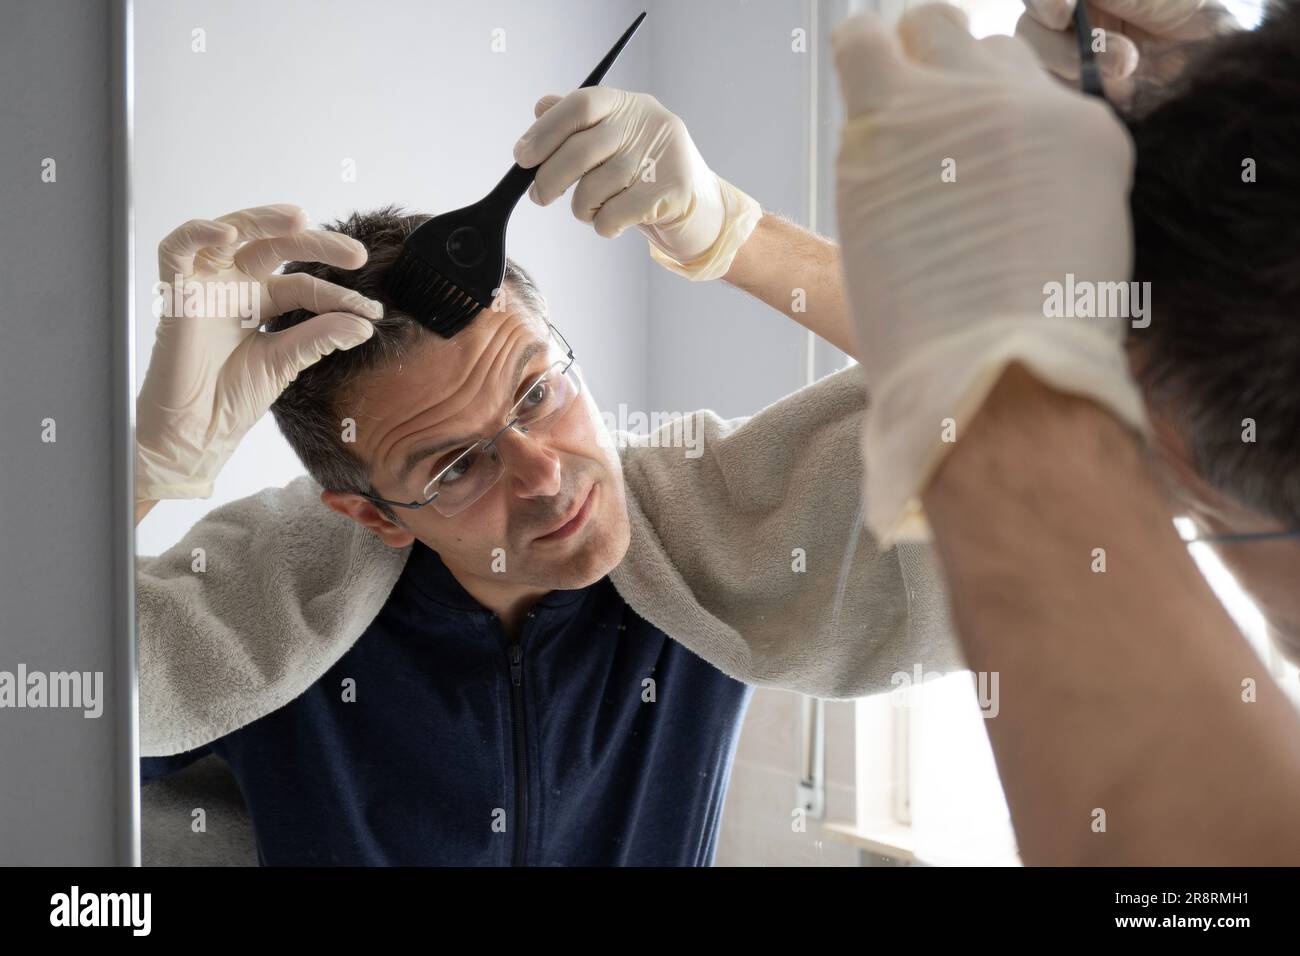 Middle-aged man with white hair is dyeing his hair in the mirror Stock Photo